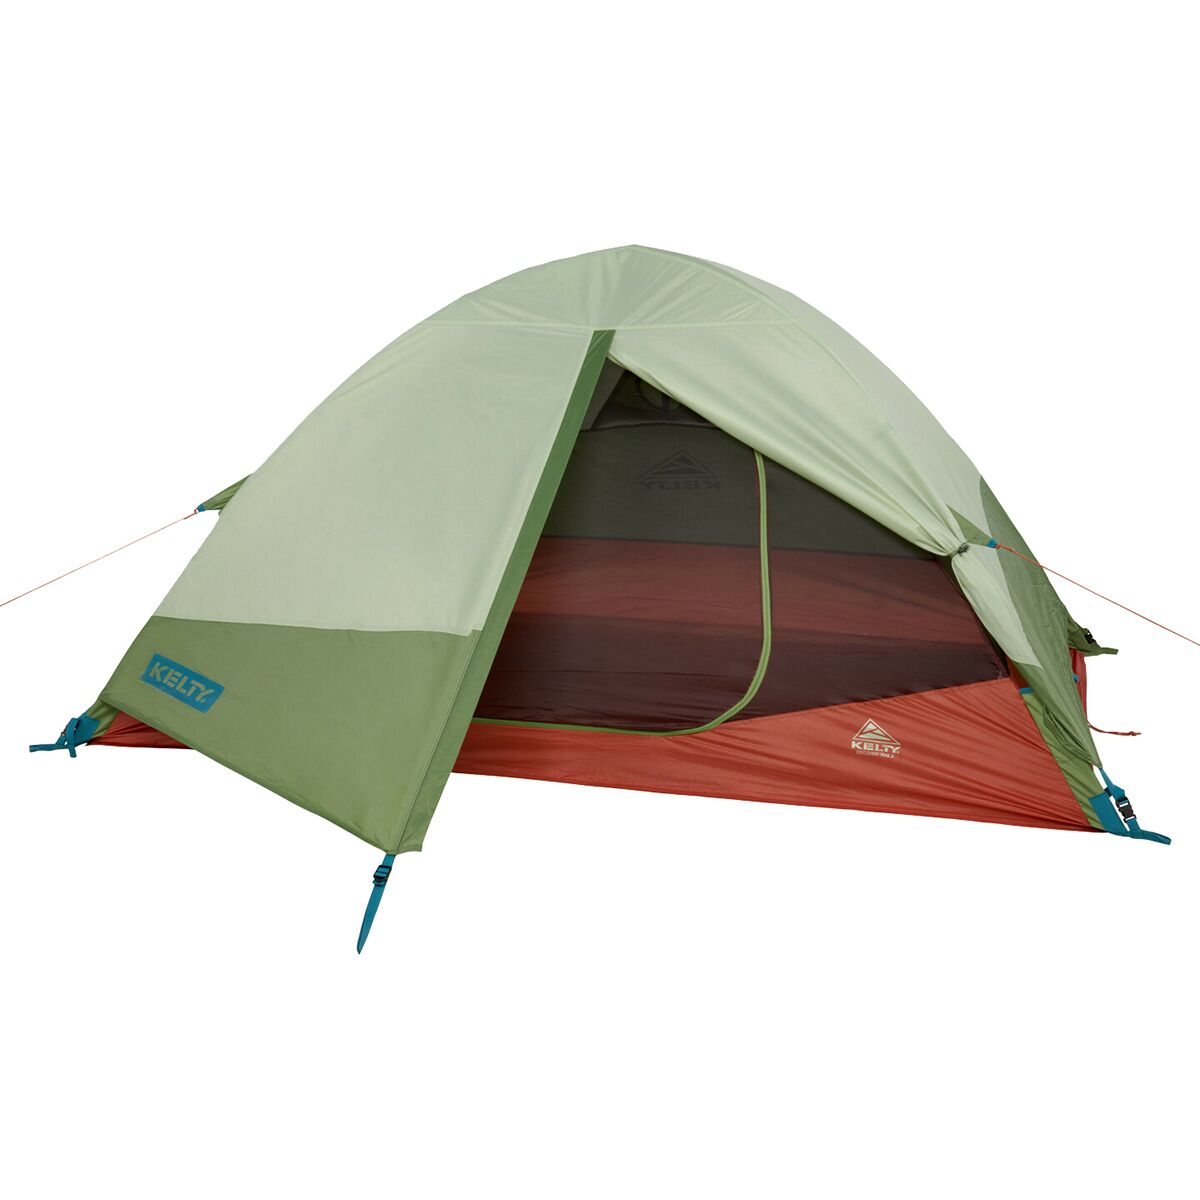 Kelty Discovery Trail 2 Tent: 2-Person 3-Season